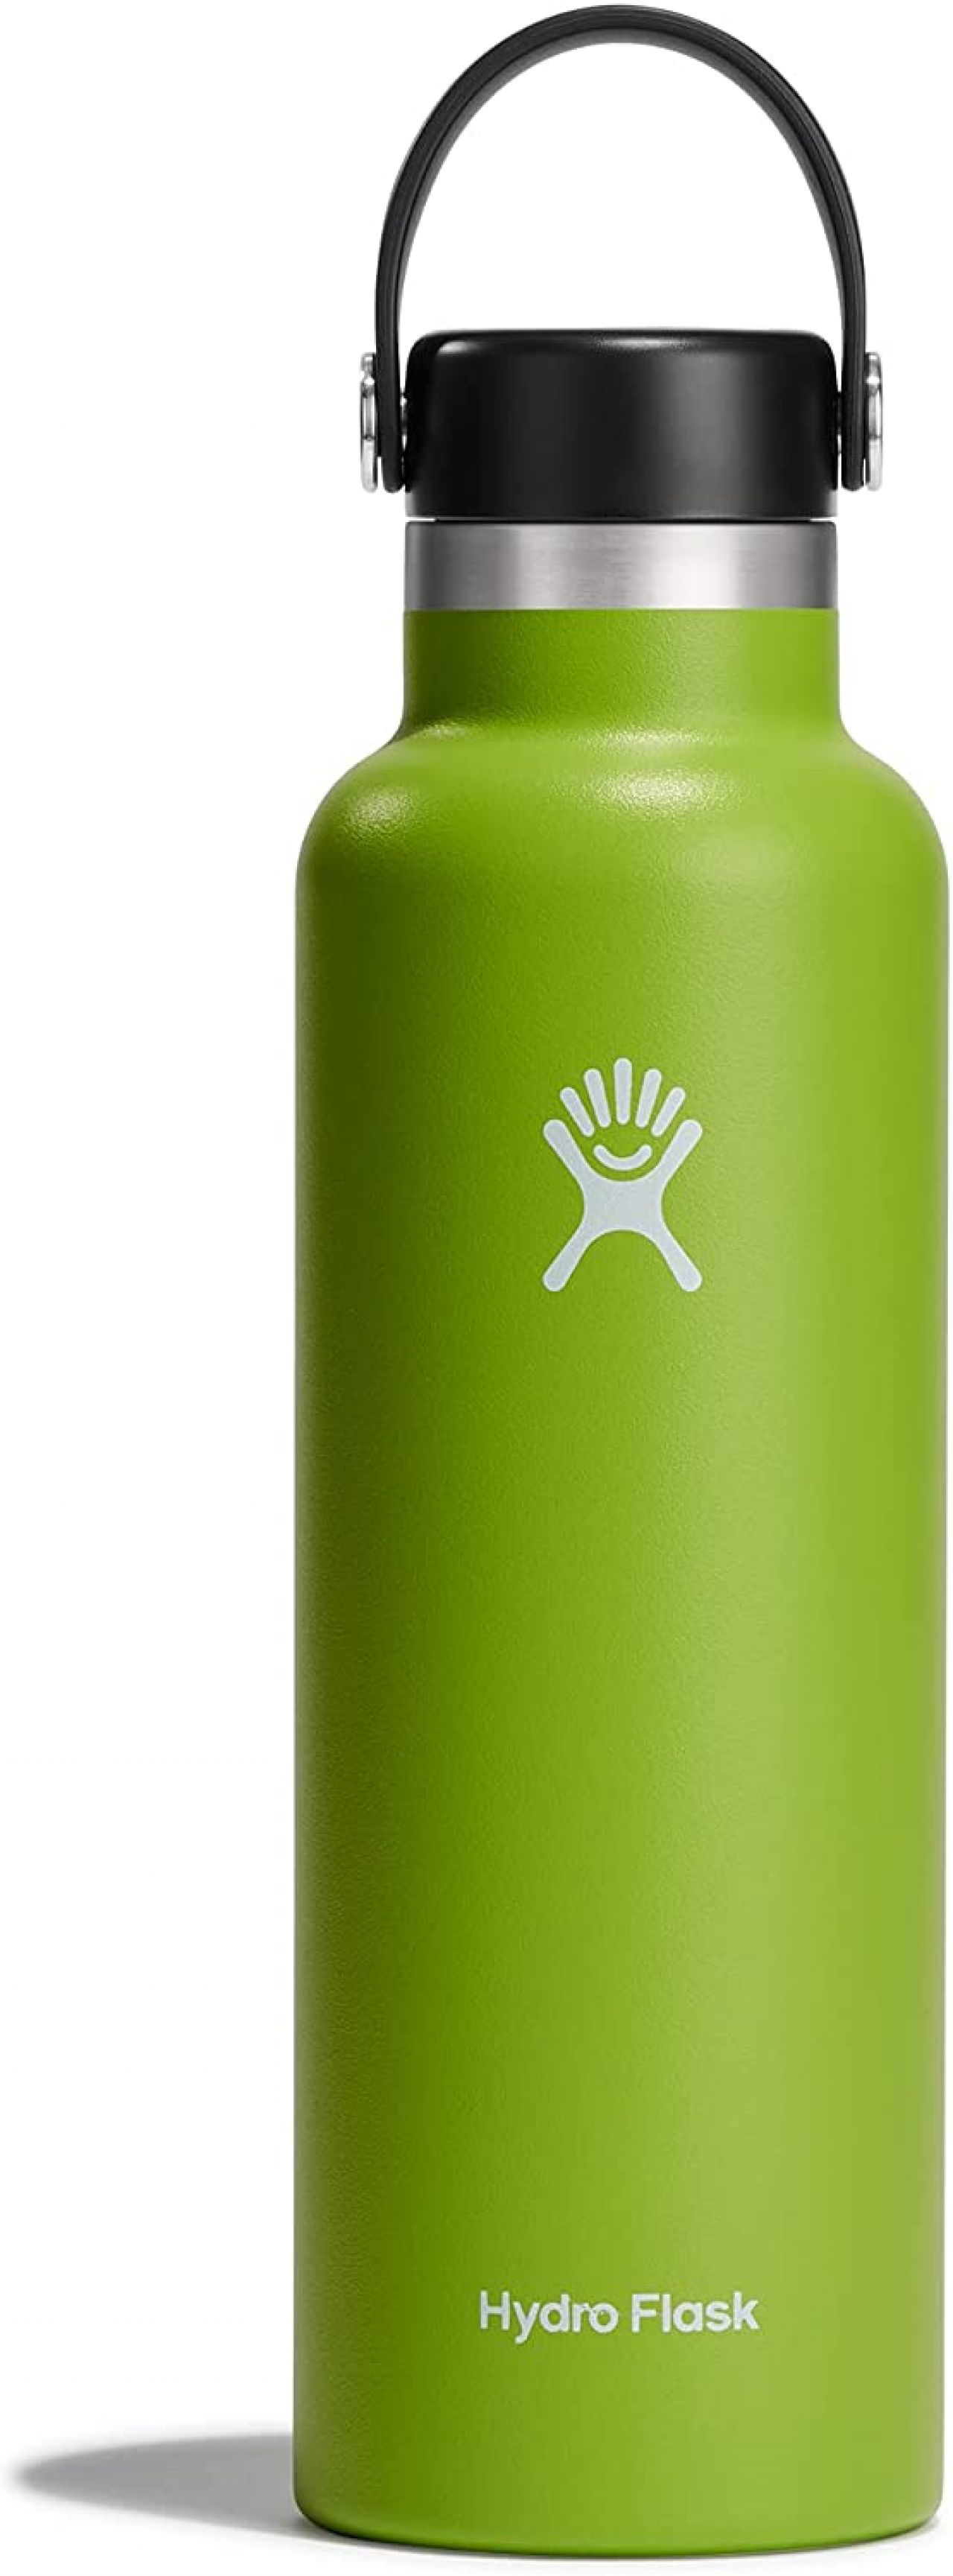 HYDROFLASK 21 OZ STANDARD MOUTH SEAGRASS Bouteilles isotherme